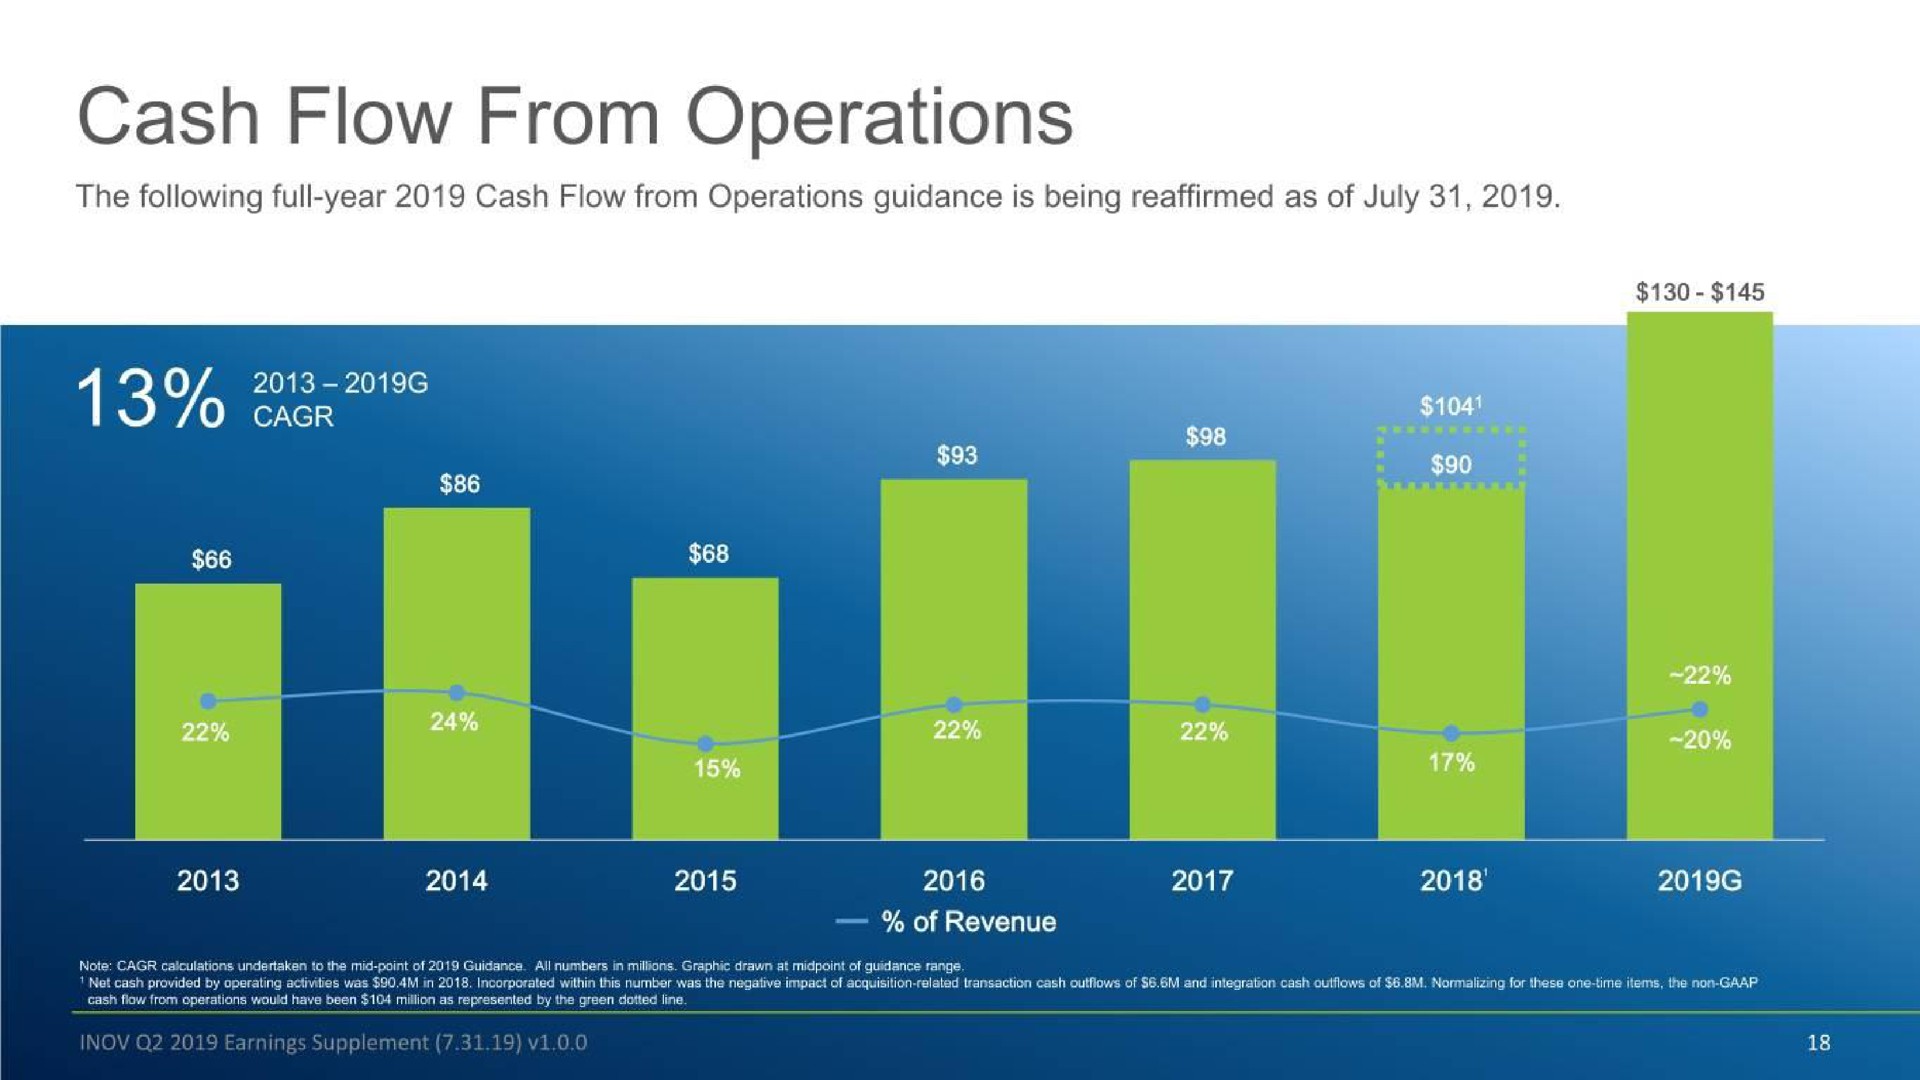 cash flow from operations oes | Inovalon